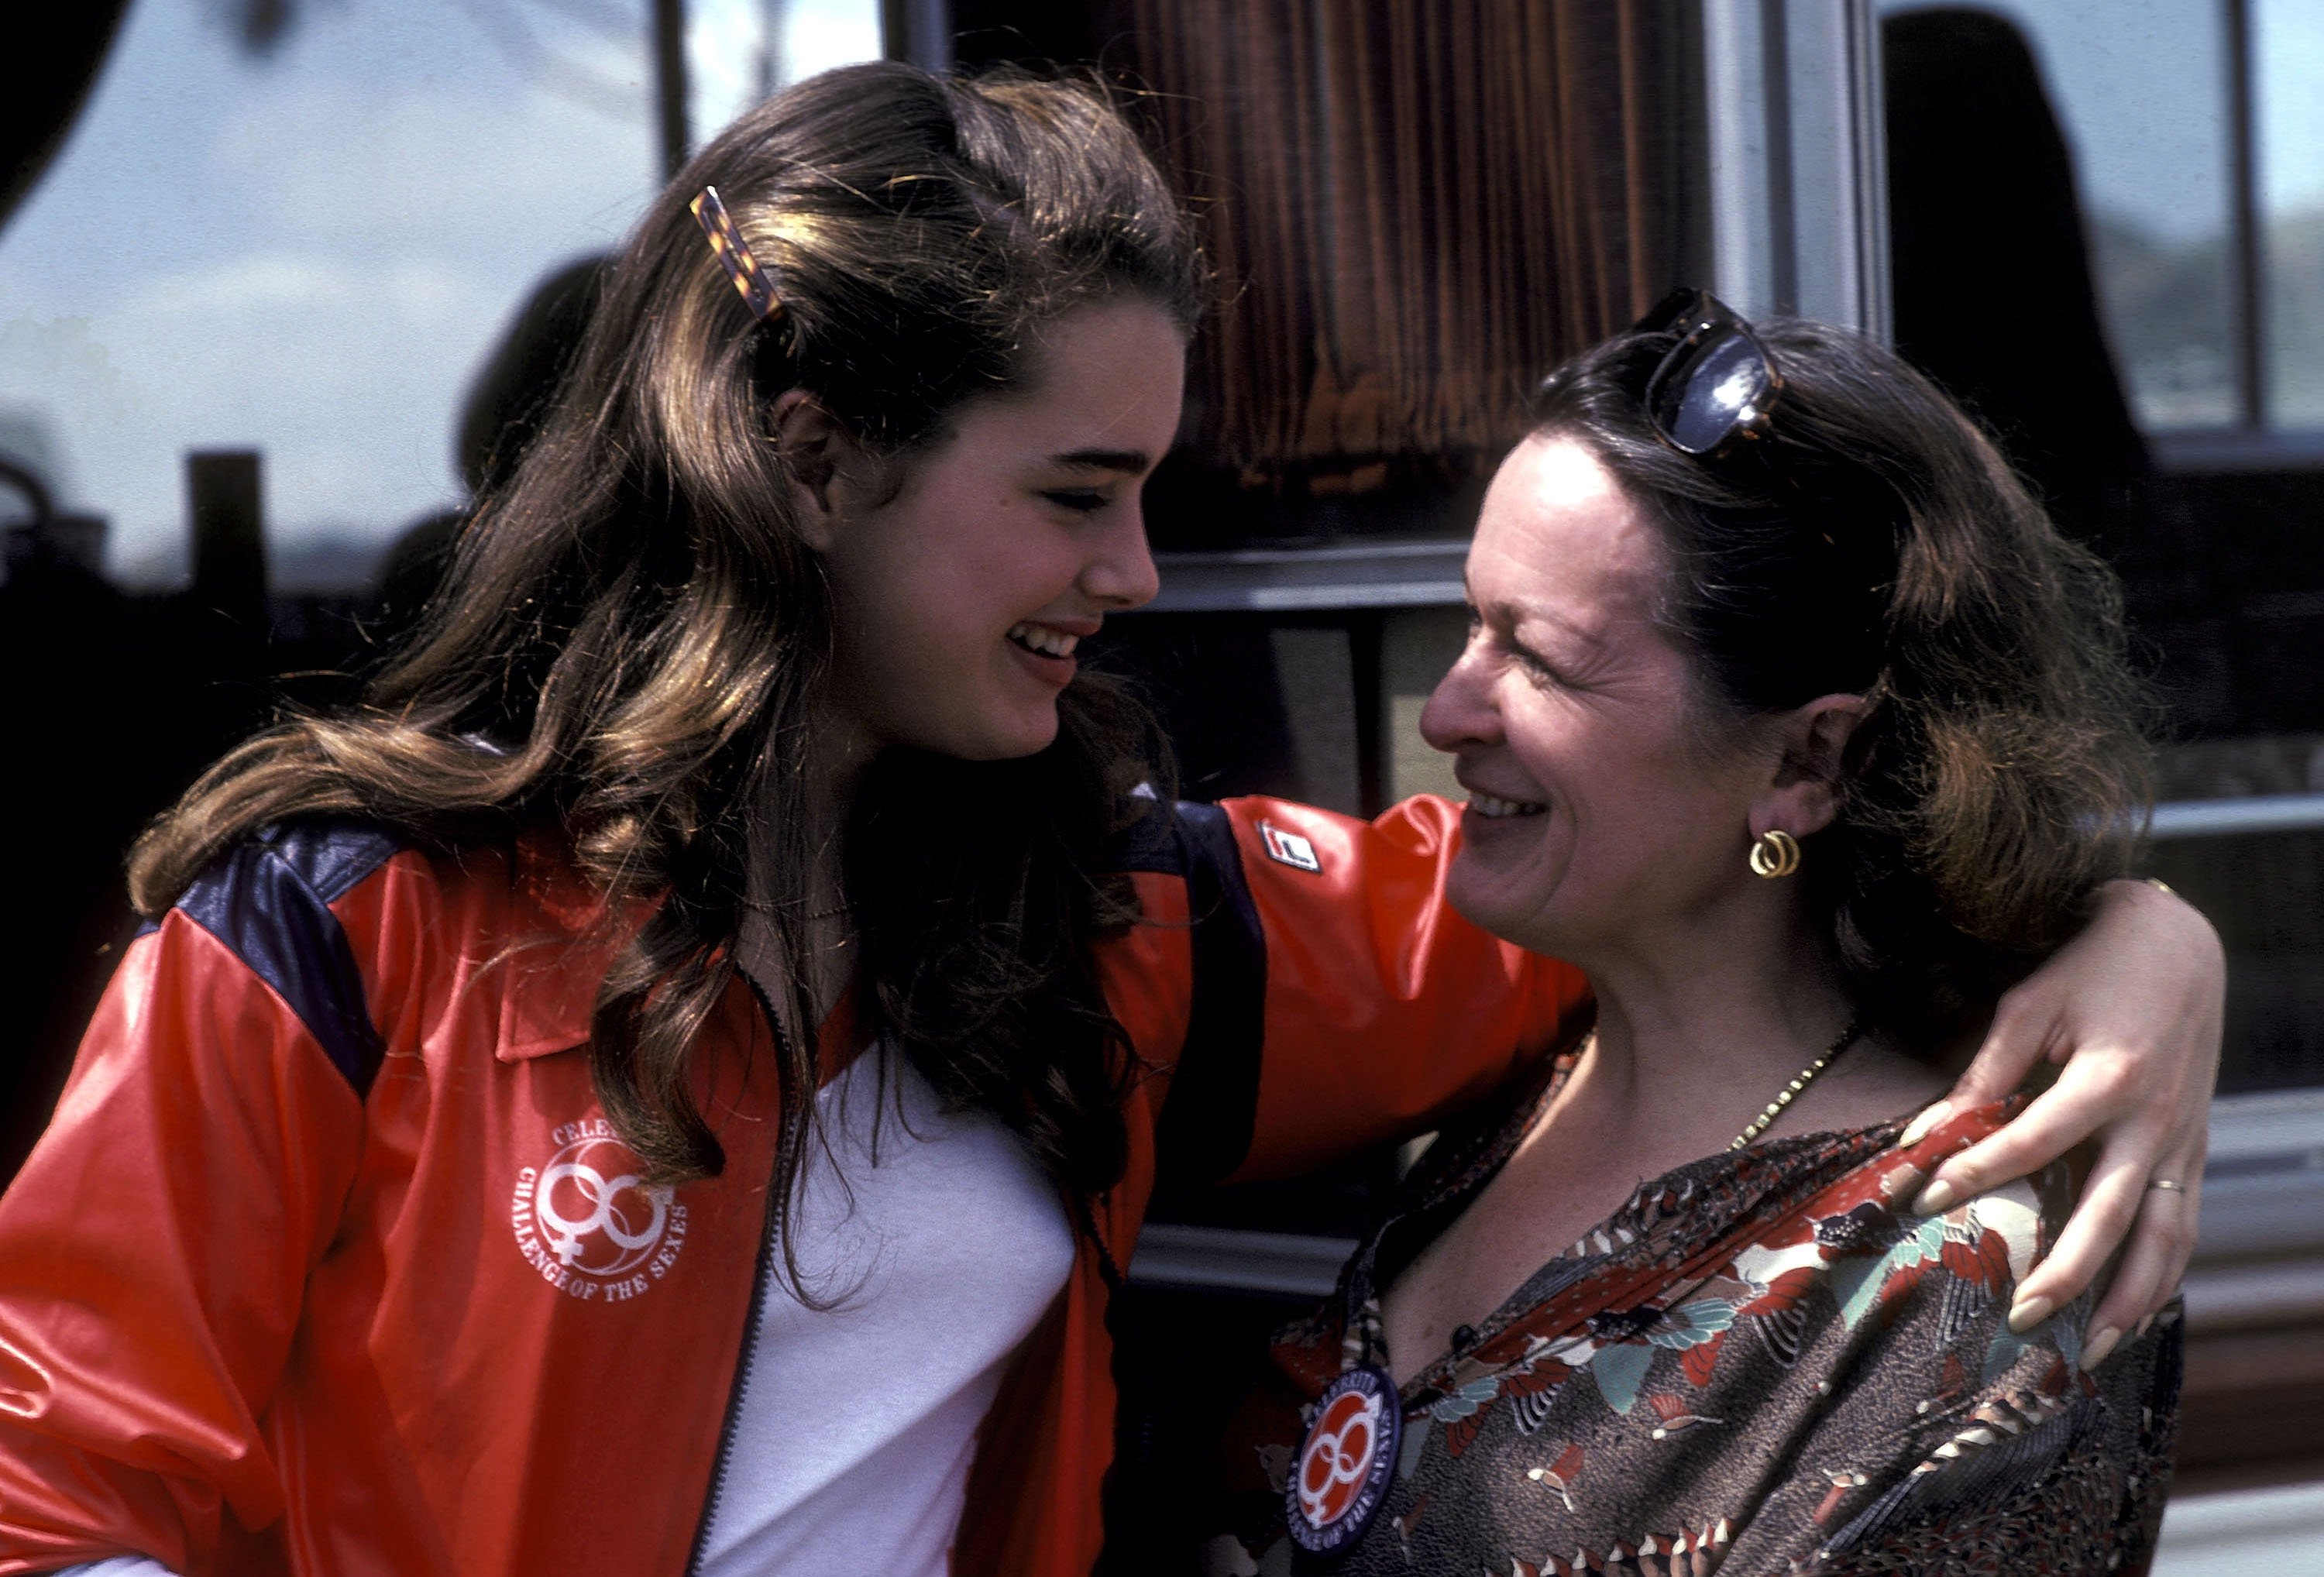 Actors Brooke Shields and her mother Teri Shields during the CBS Television Competition Special "Celebrity Challenge of the Stars" at Mt. San Antonio College on March 23, 1980 in Walnut, California. / Source: Getty Images